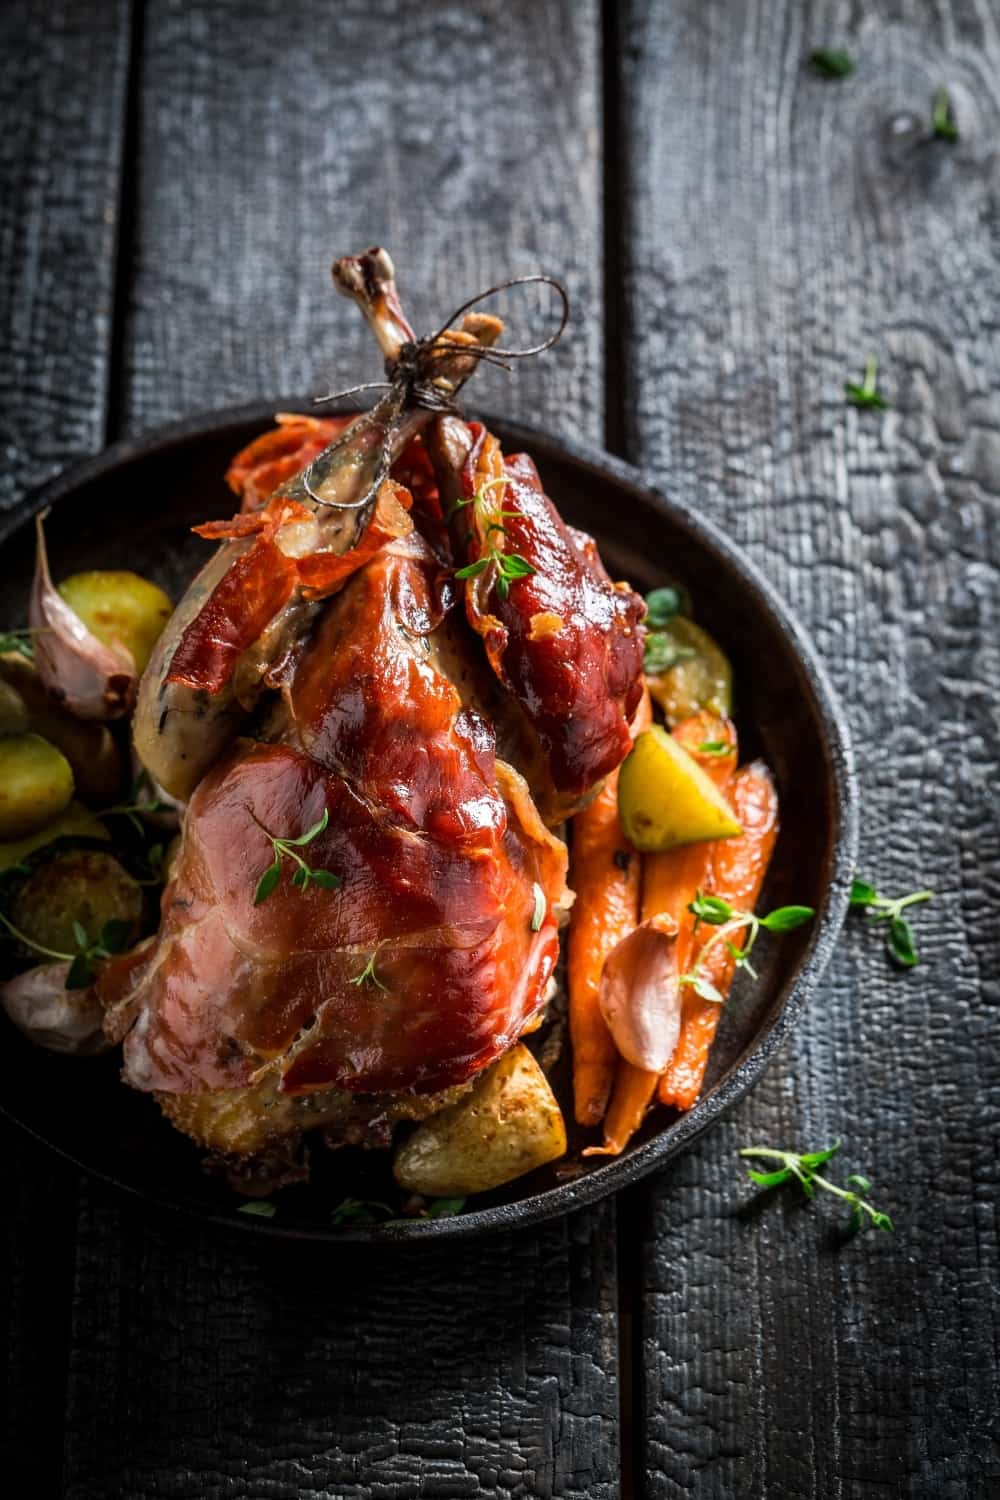 Grilled pheasant with bacon and vegetables on dark background